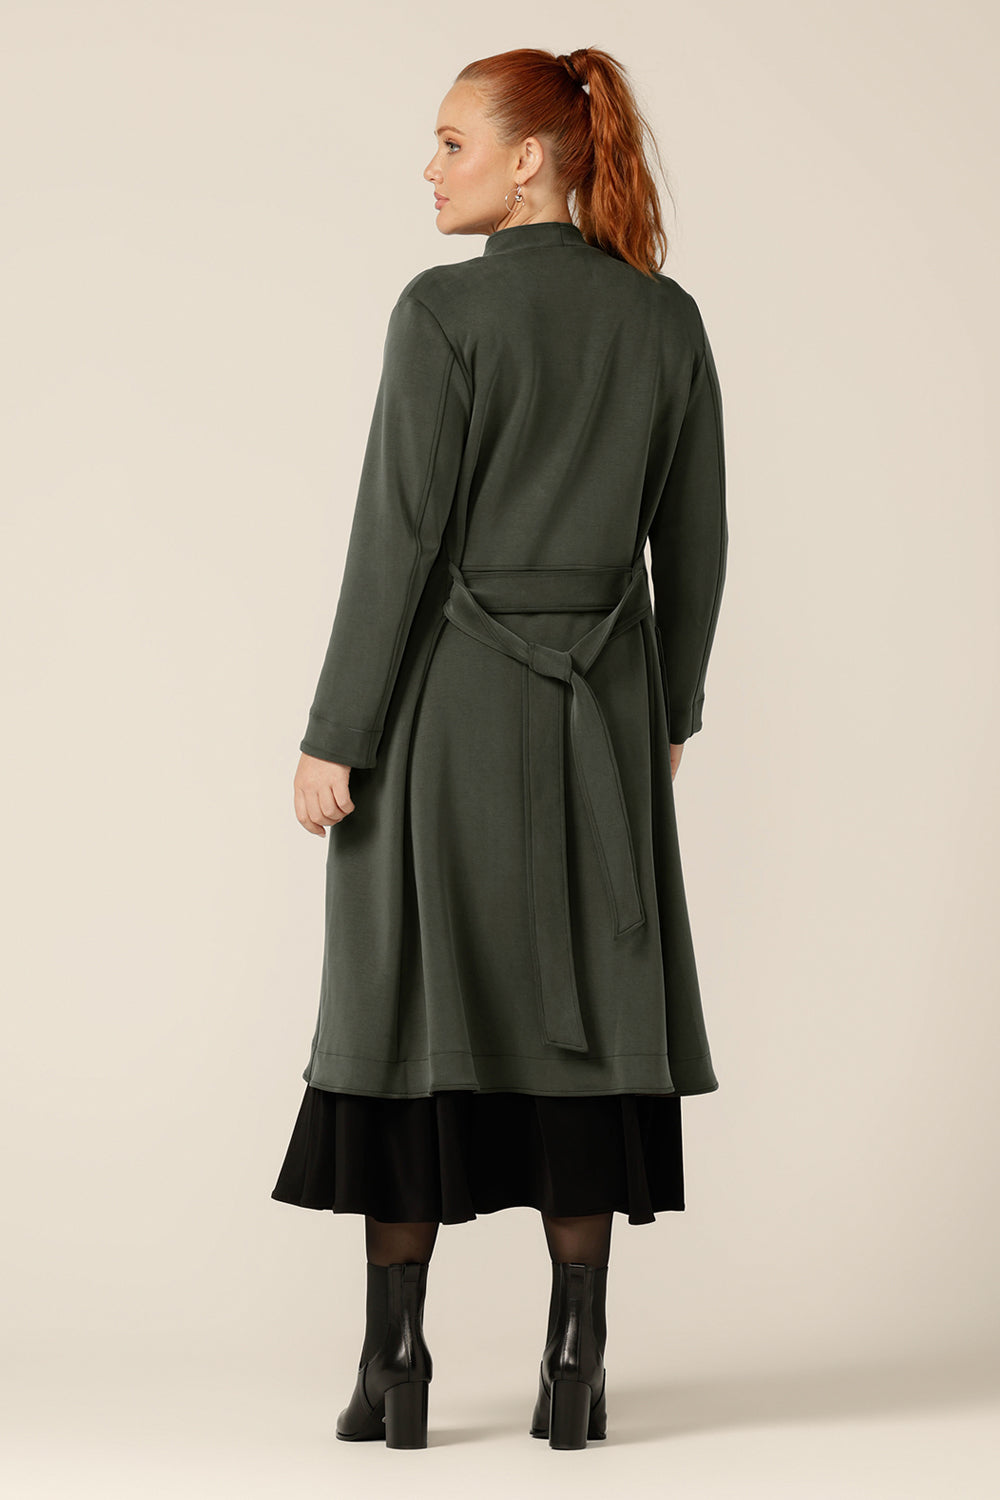 Back view of a size 12 woman wearing the Marant Trenchcoat in Sage green by Australian and New Zealand women's clothing label, L&F. A collarless, open fronted coat with tie belt and patch pockets, this warm coat in stretchy modal fabric is worn with a 3/4 sleeve, reversible black dress.